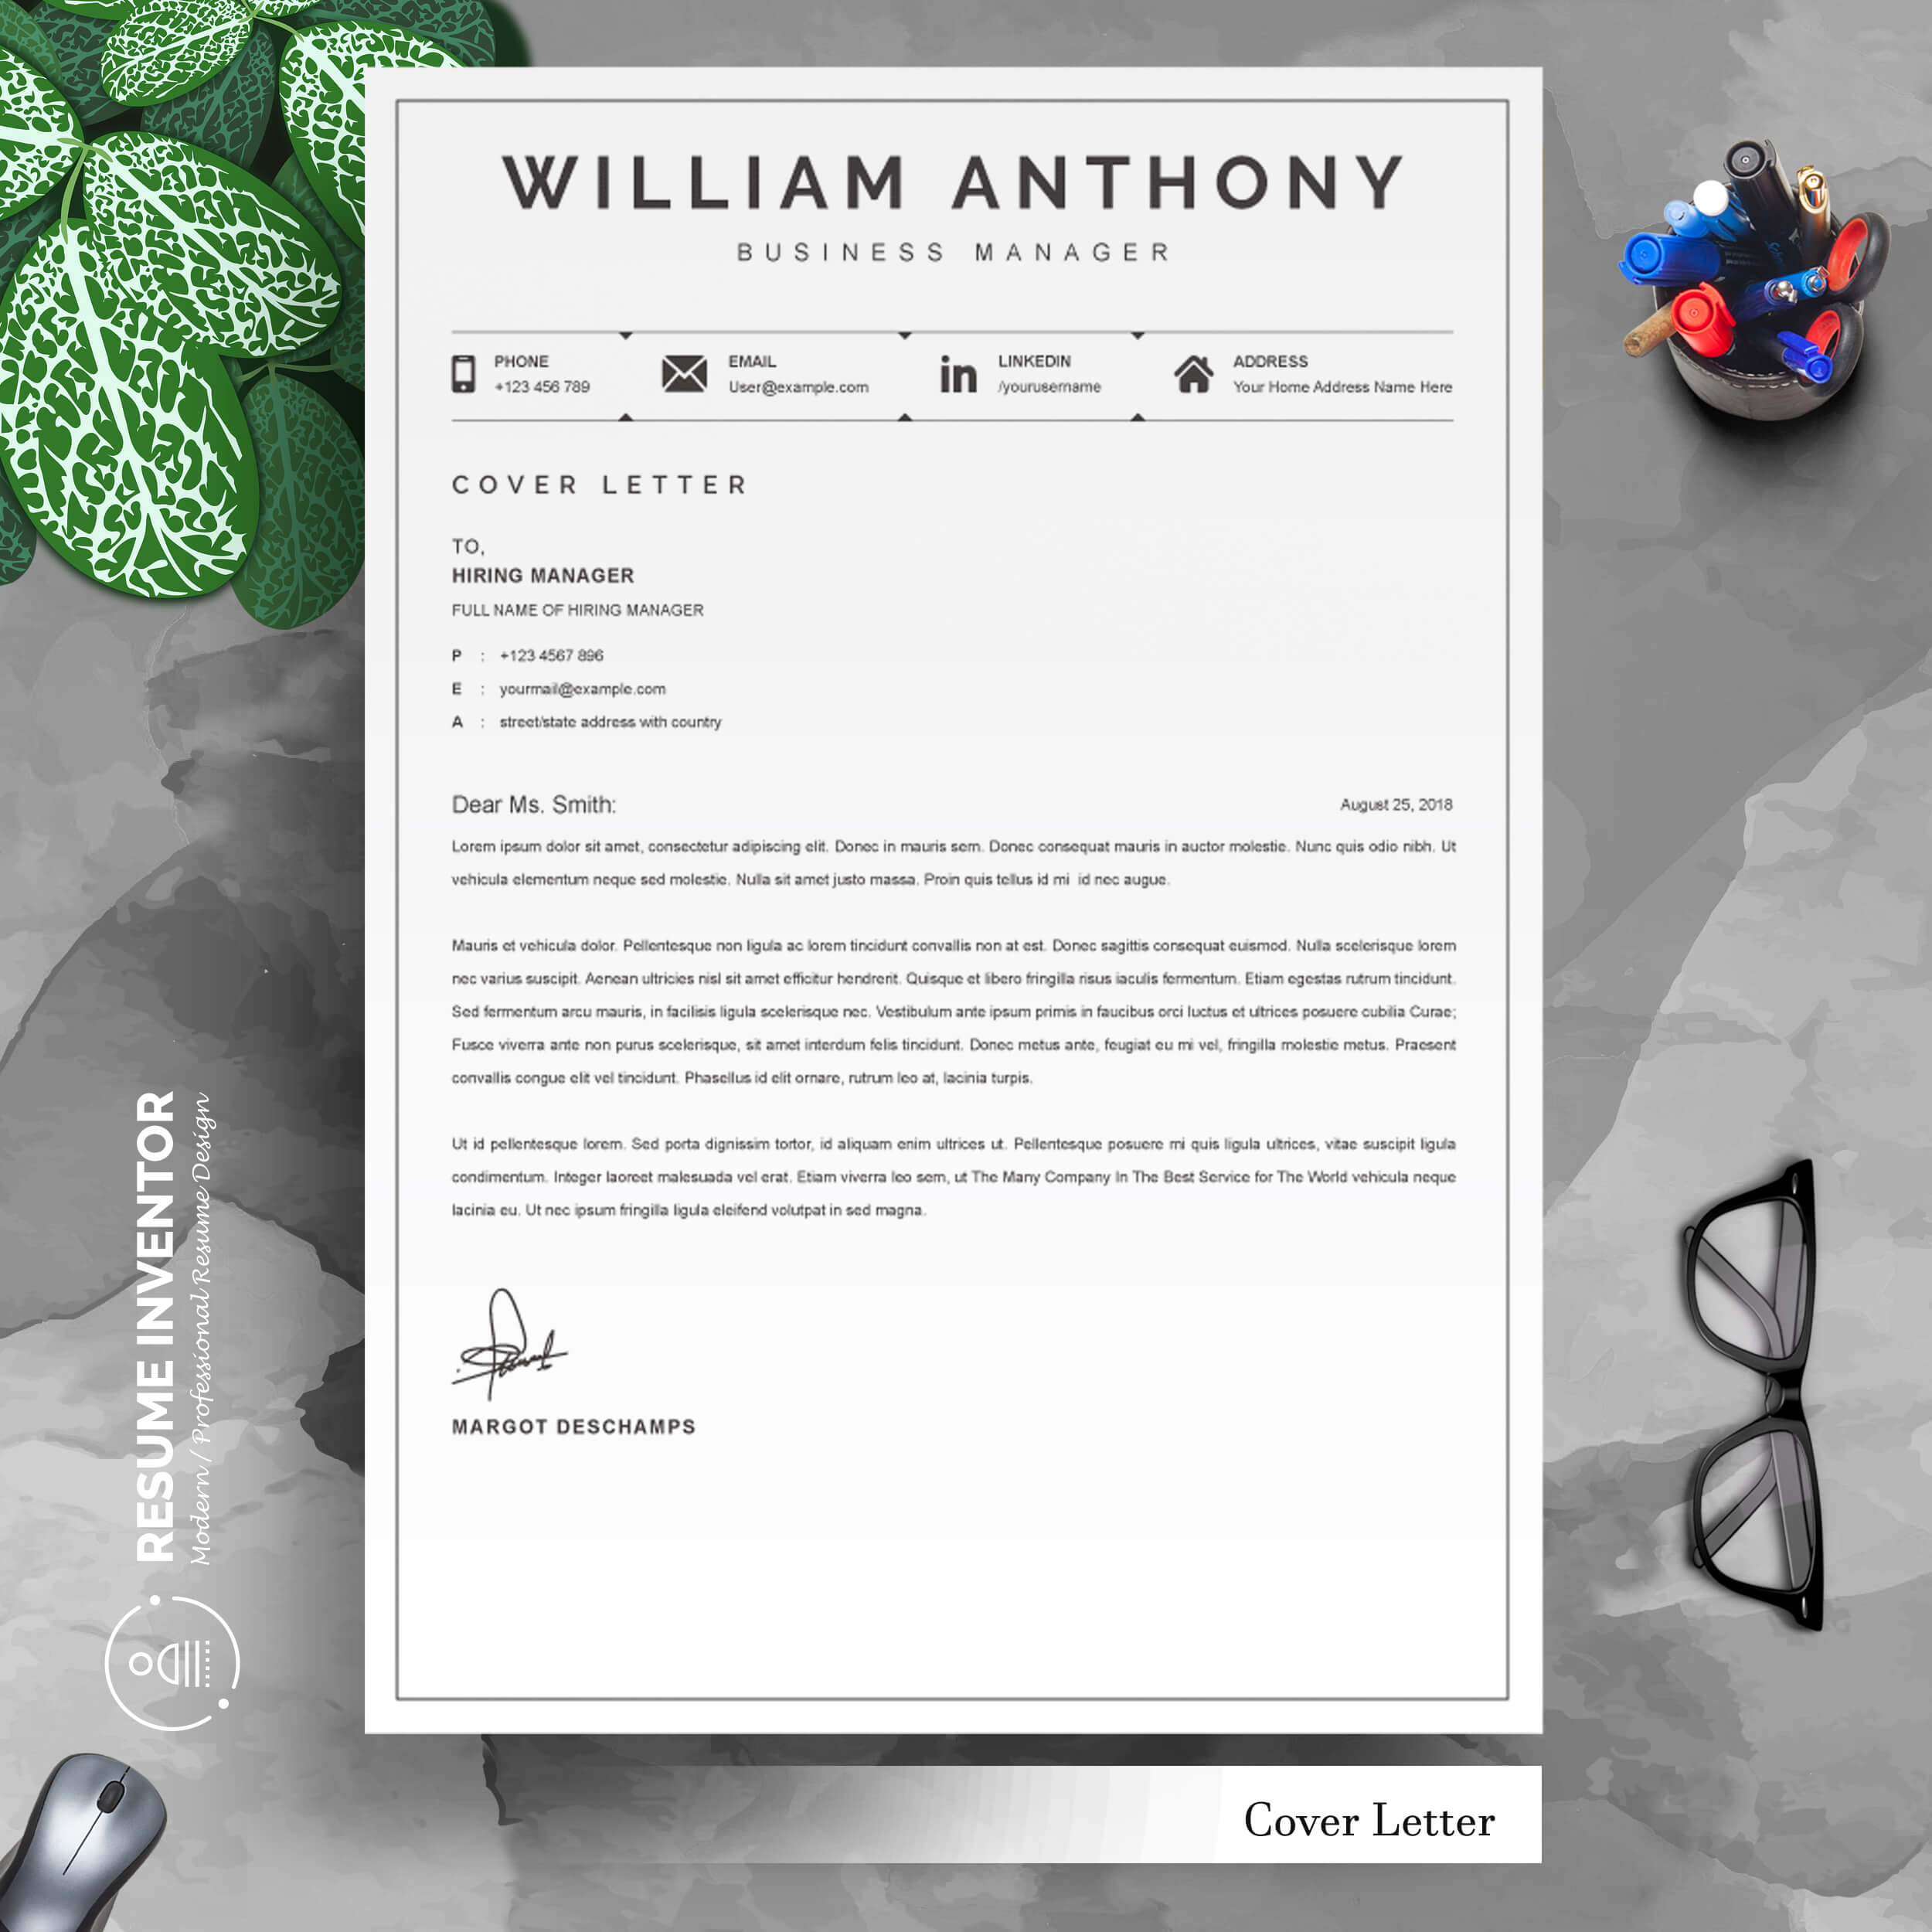 03 3 pages professional ms word aple pages eps photoshop psd resume cv design template design by resume inventor 217